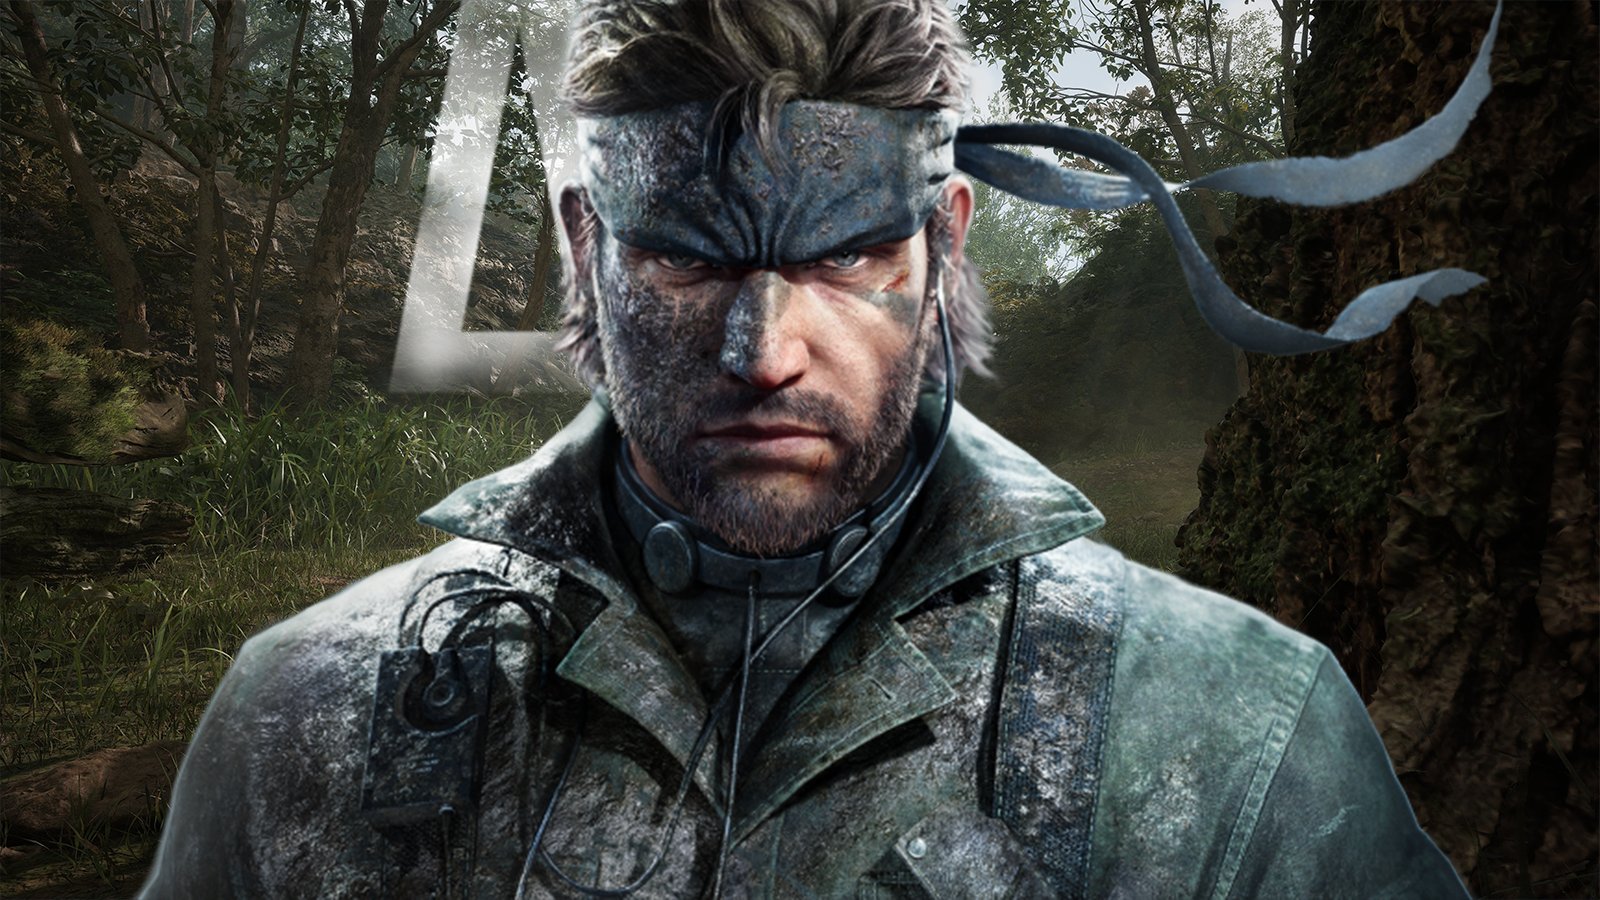 Is Hideo Kojima Involved In The Making Of Metal Gear Solid Delta: Snake  Eater?